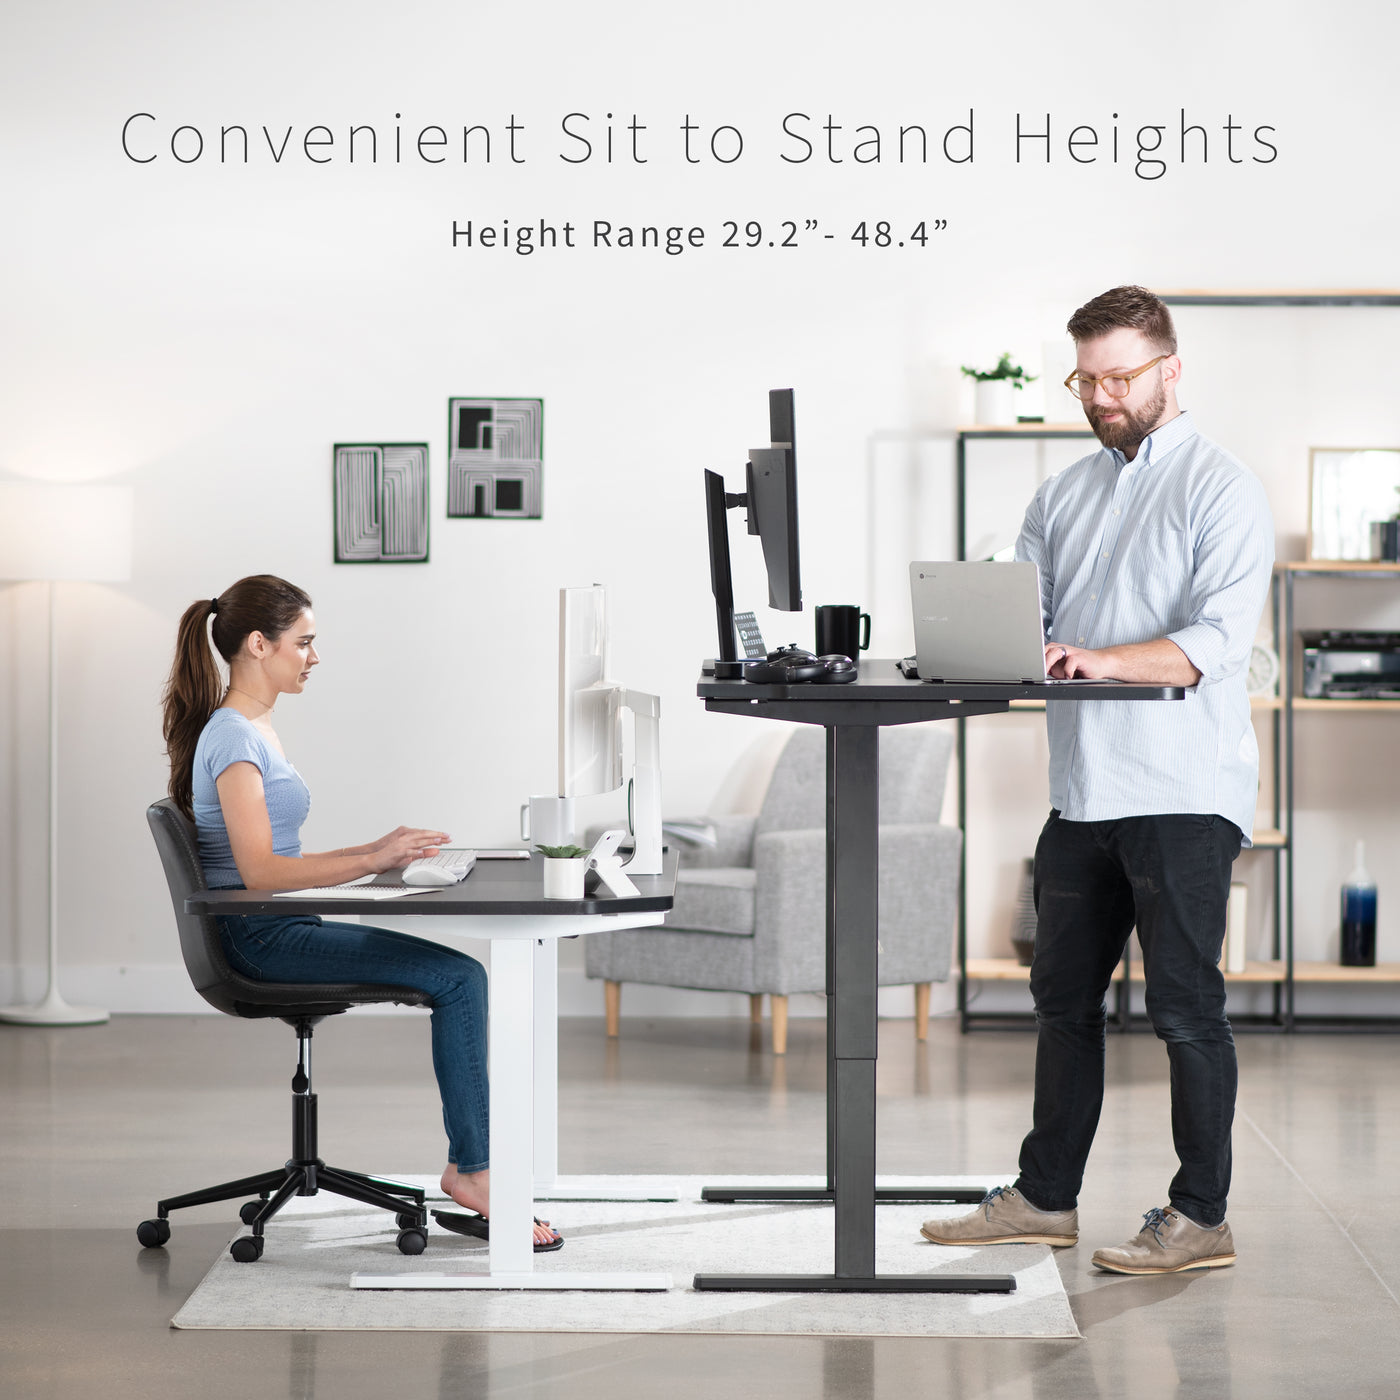 Smart programmable panel to go from sitting to standing on demand by the press of a button.